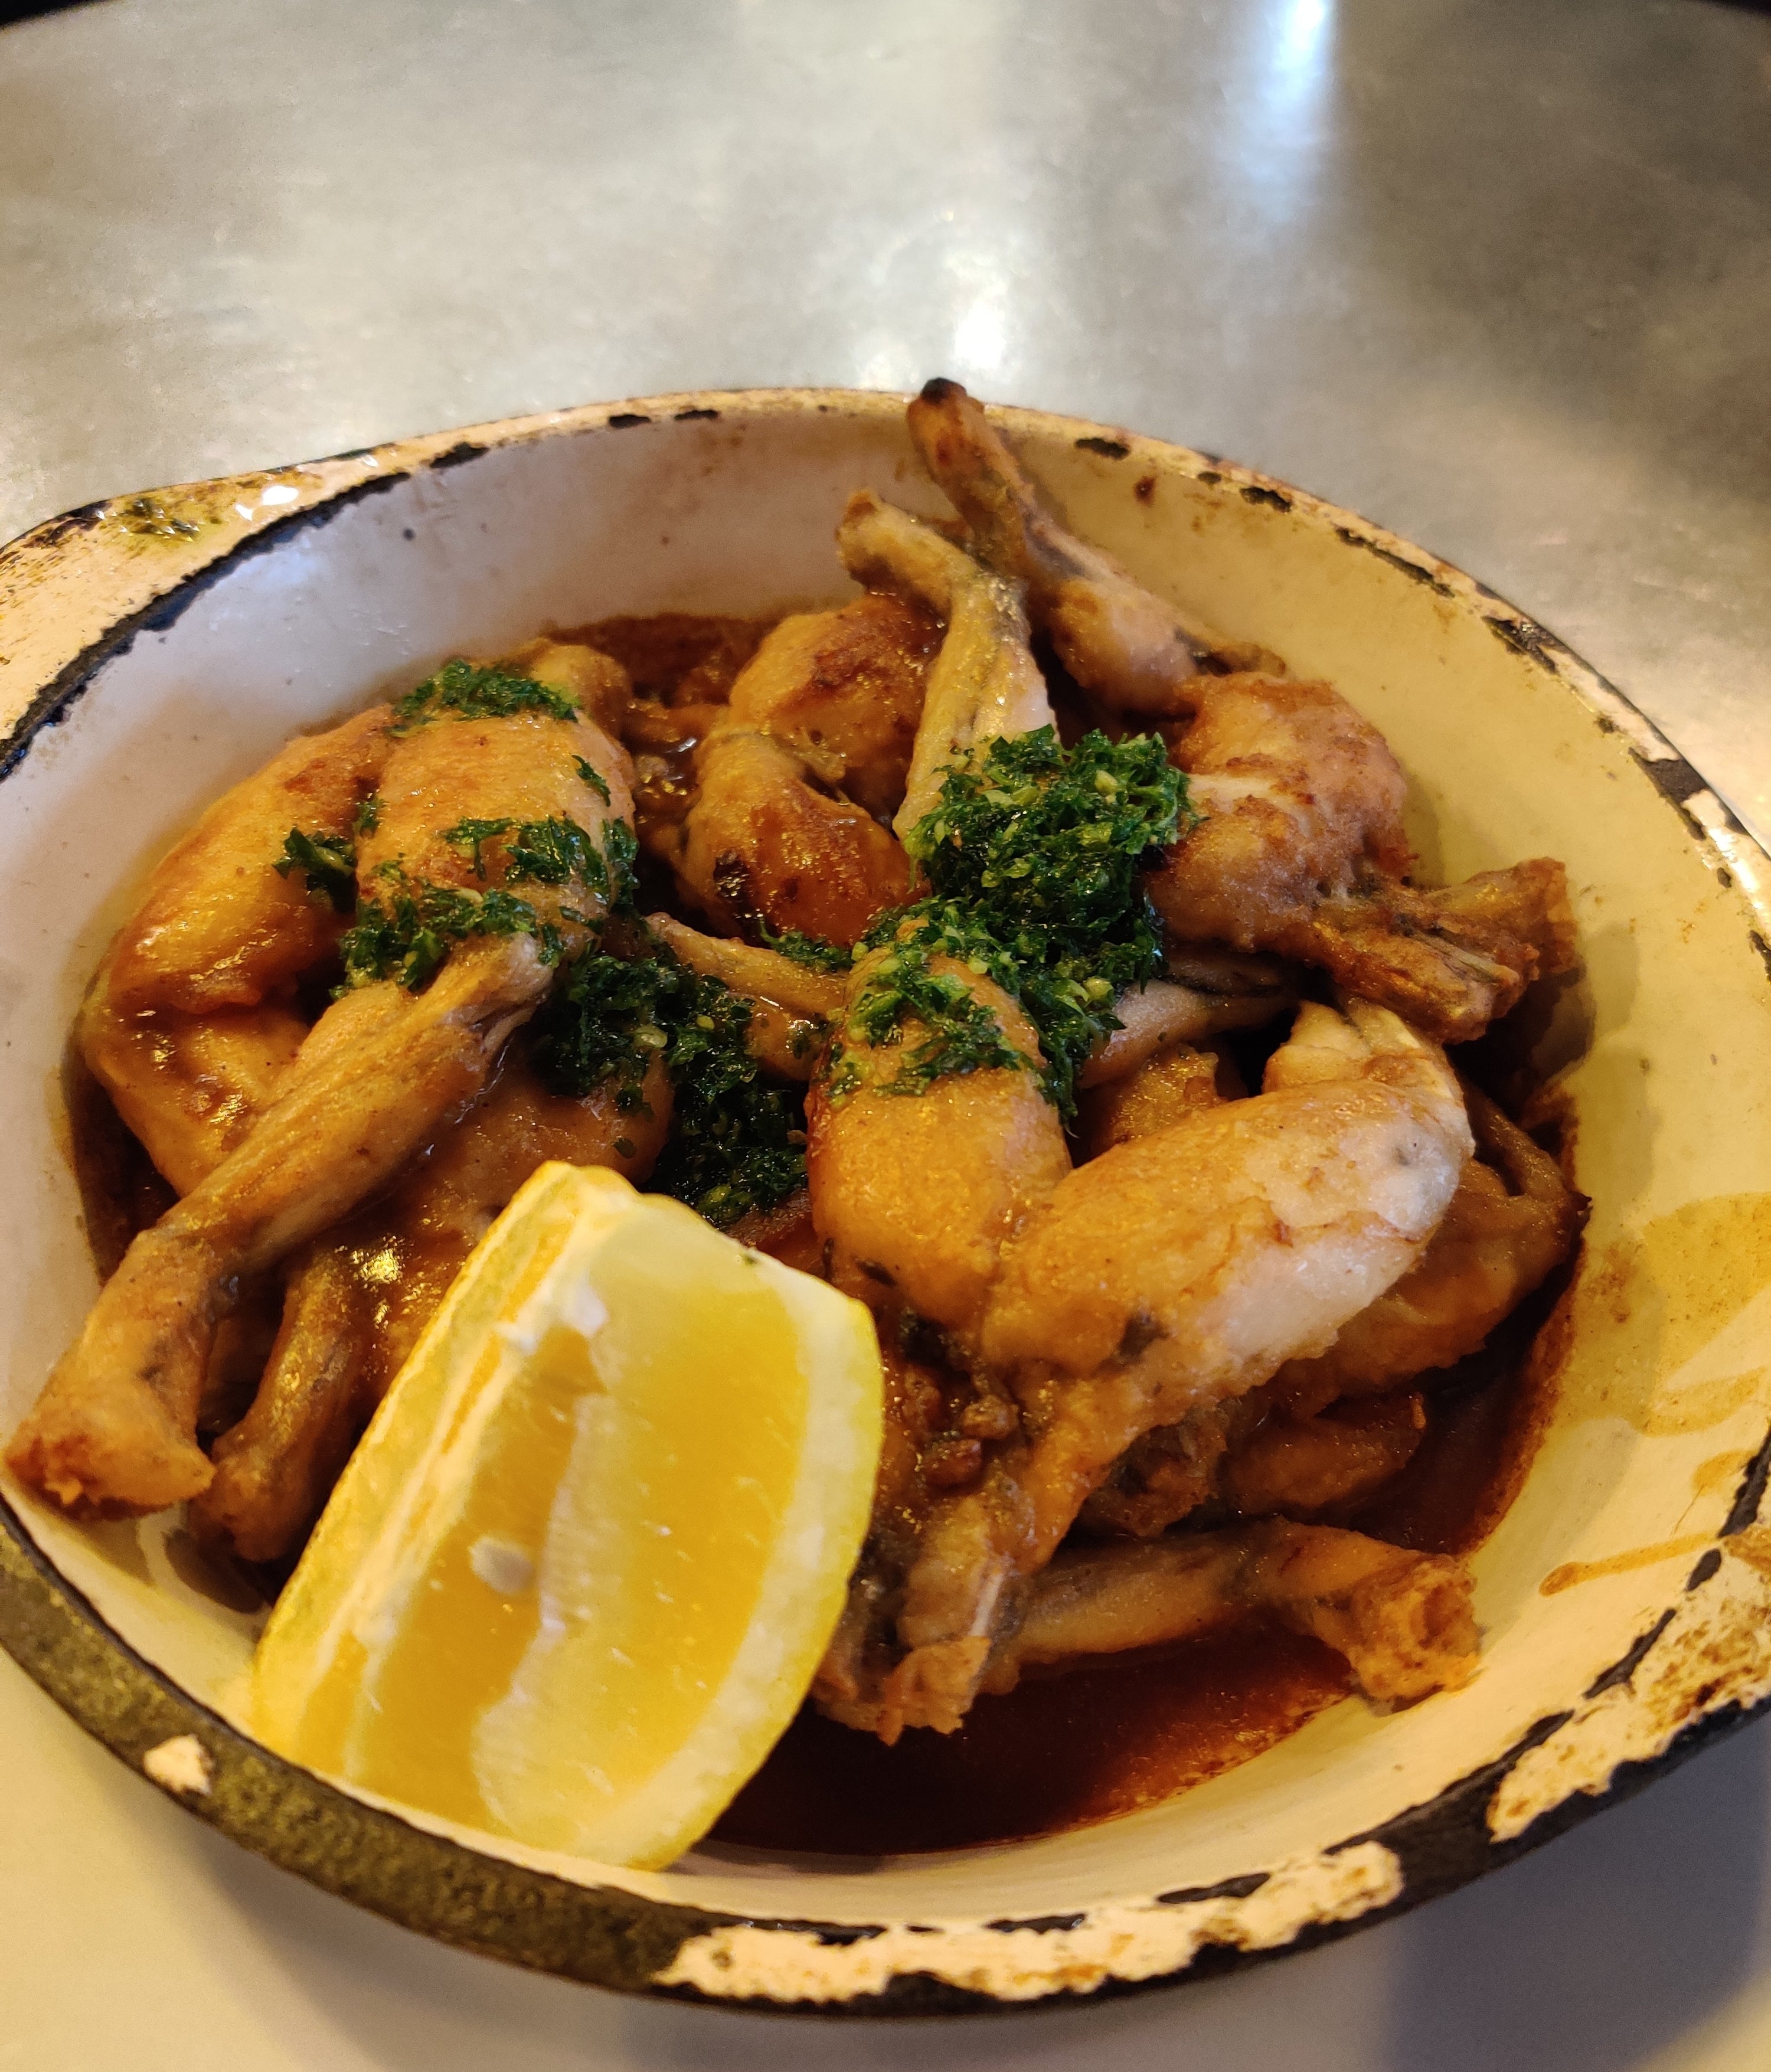 A rustic dish of frog legs garnished with green herbs and served with a lemon wedge